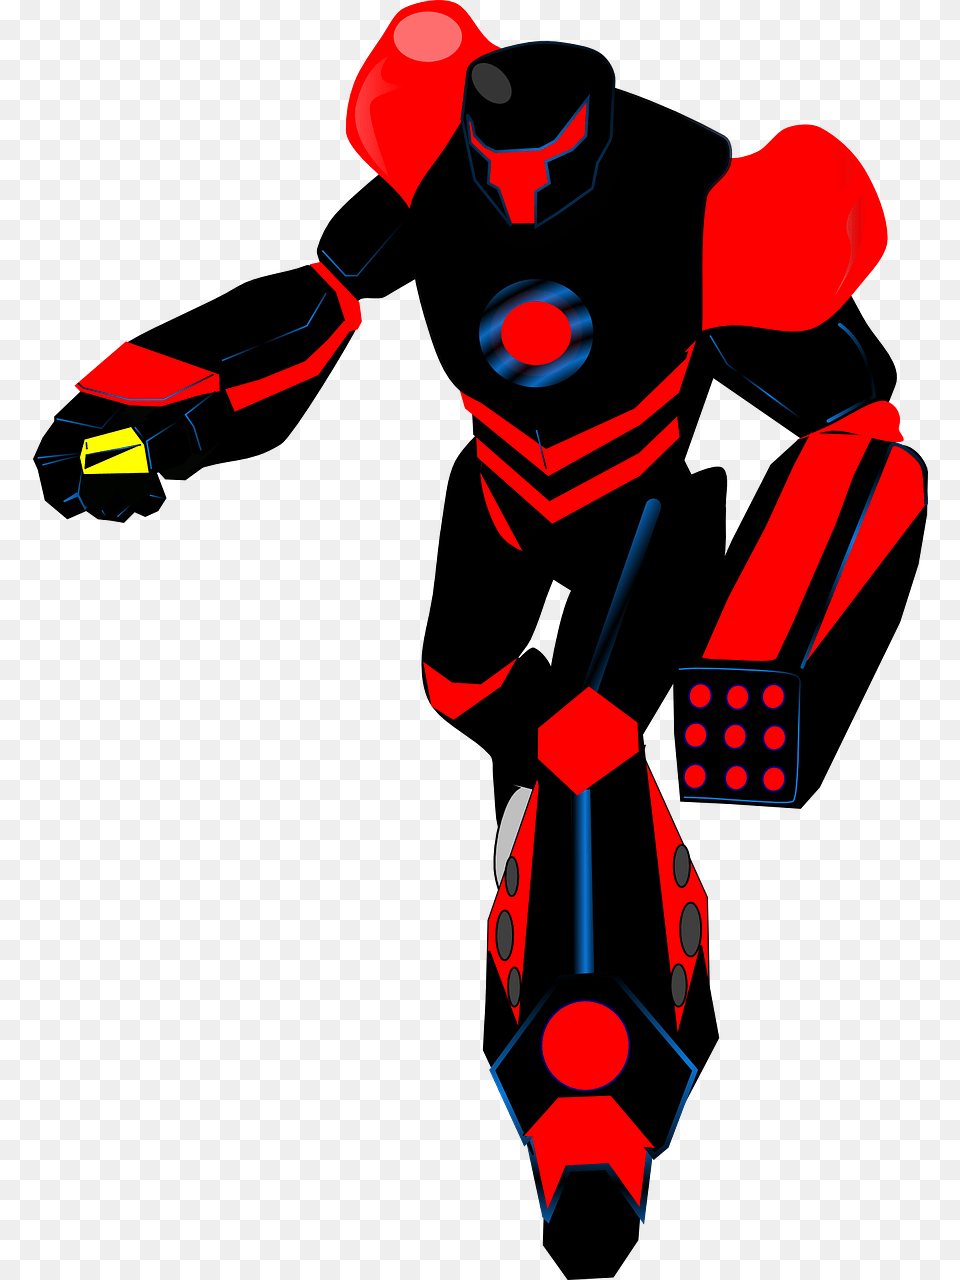 Robot Red Black Transformer Android Robotics Black And Red Robot, Person Png Image